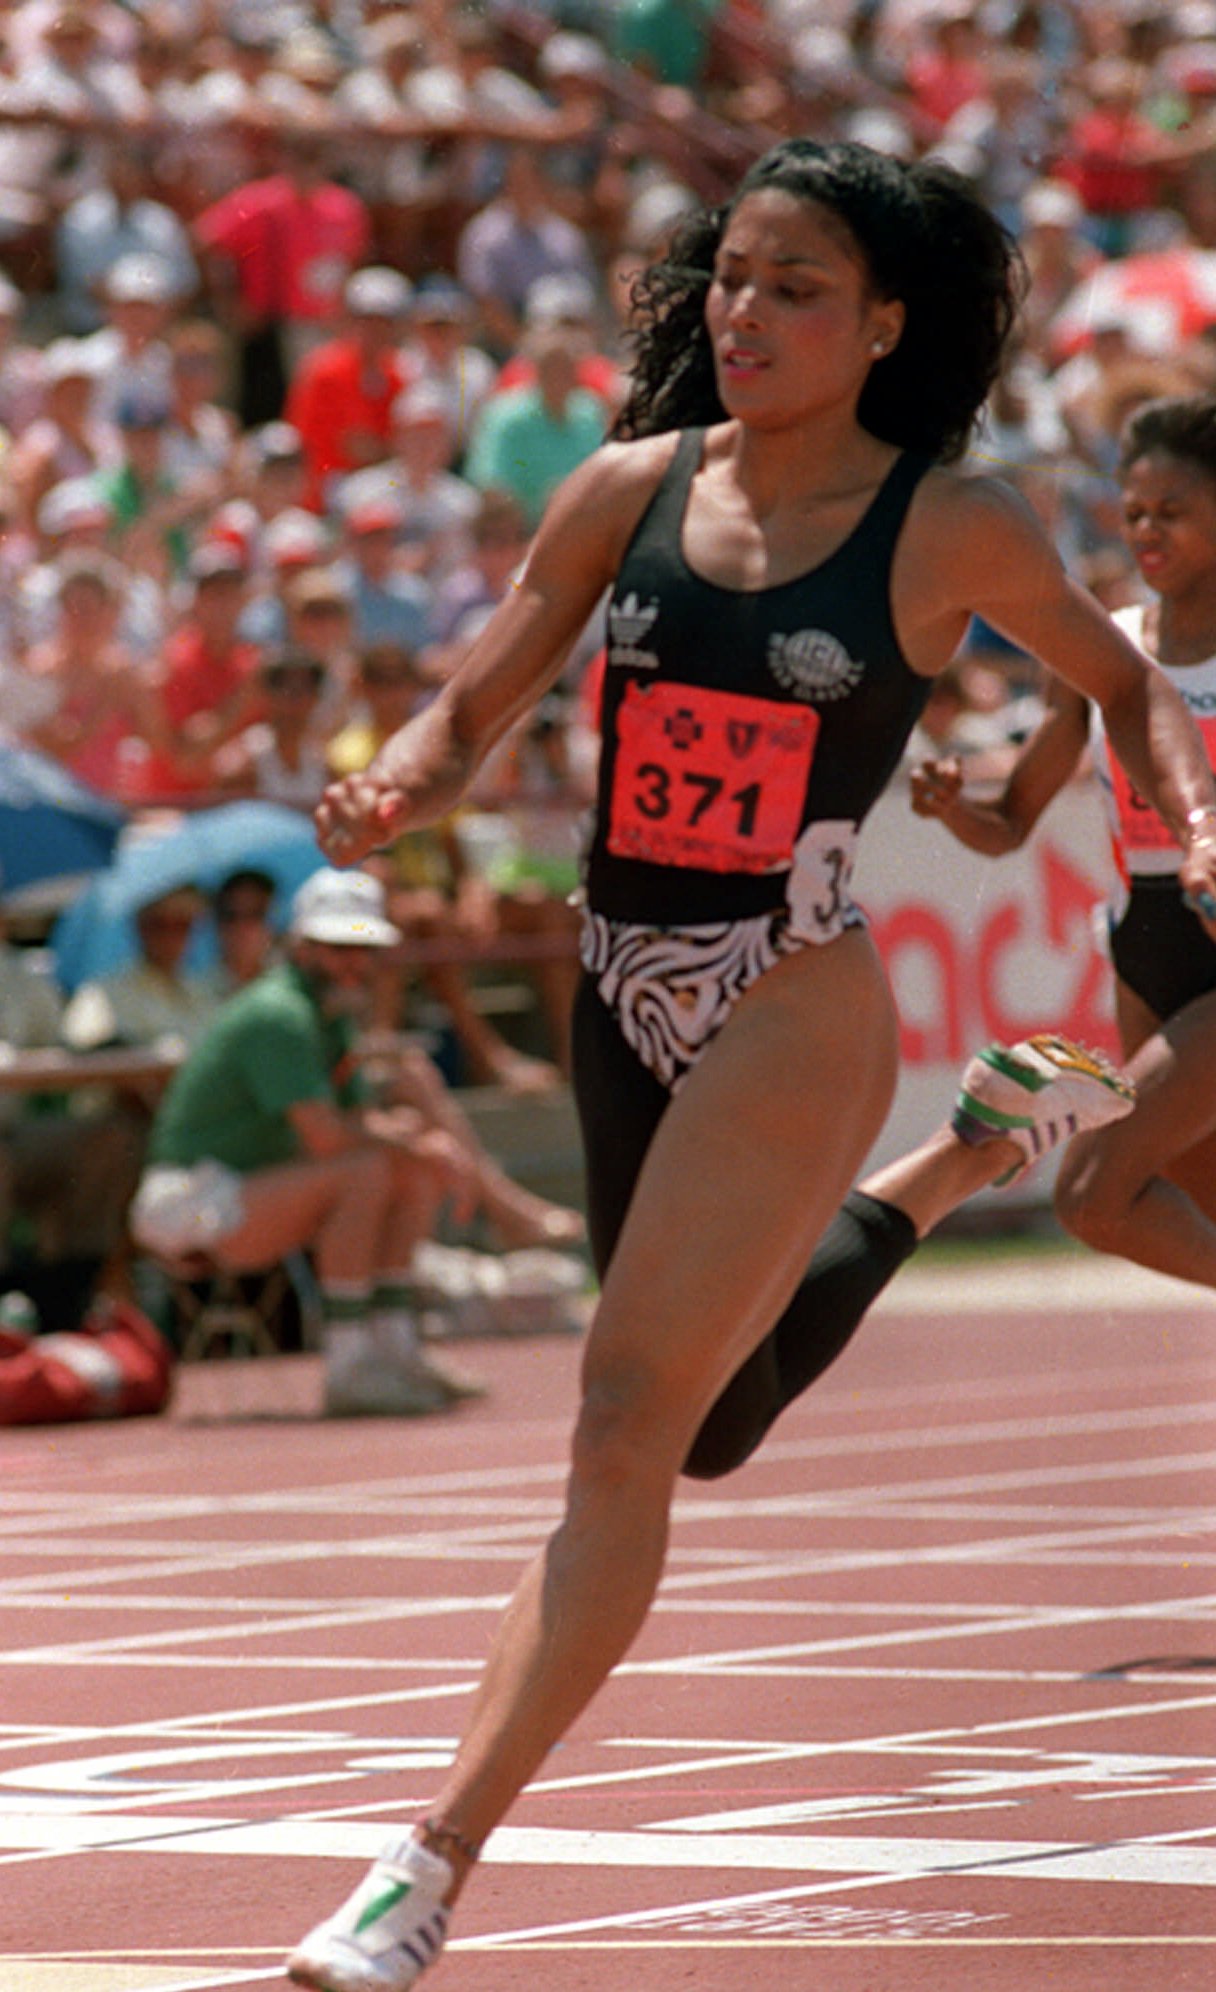 Florence Griffith Joyner runs in a preliminary heat of the women's 200-meters at the U.S. Olympic Track and Field trials in Indianapolis on August 13, 1988.  (AP Photo/Al Behrman)